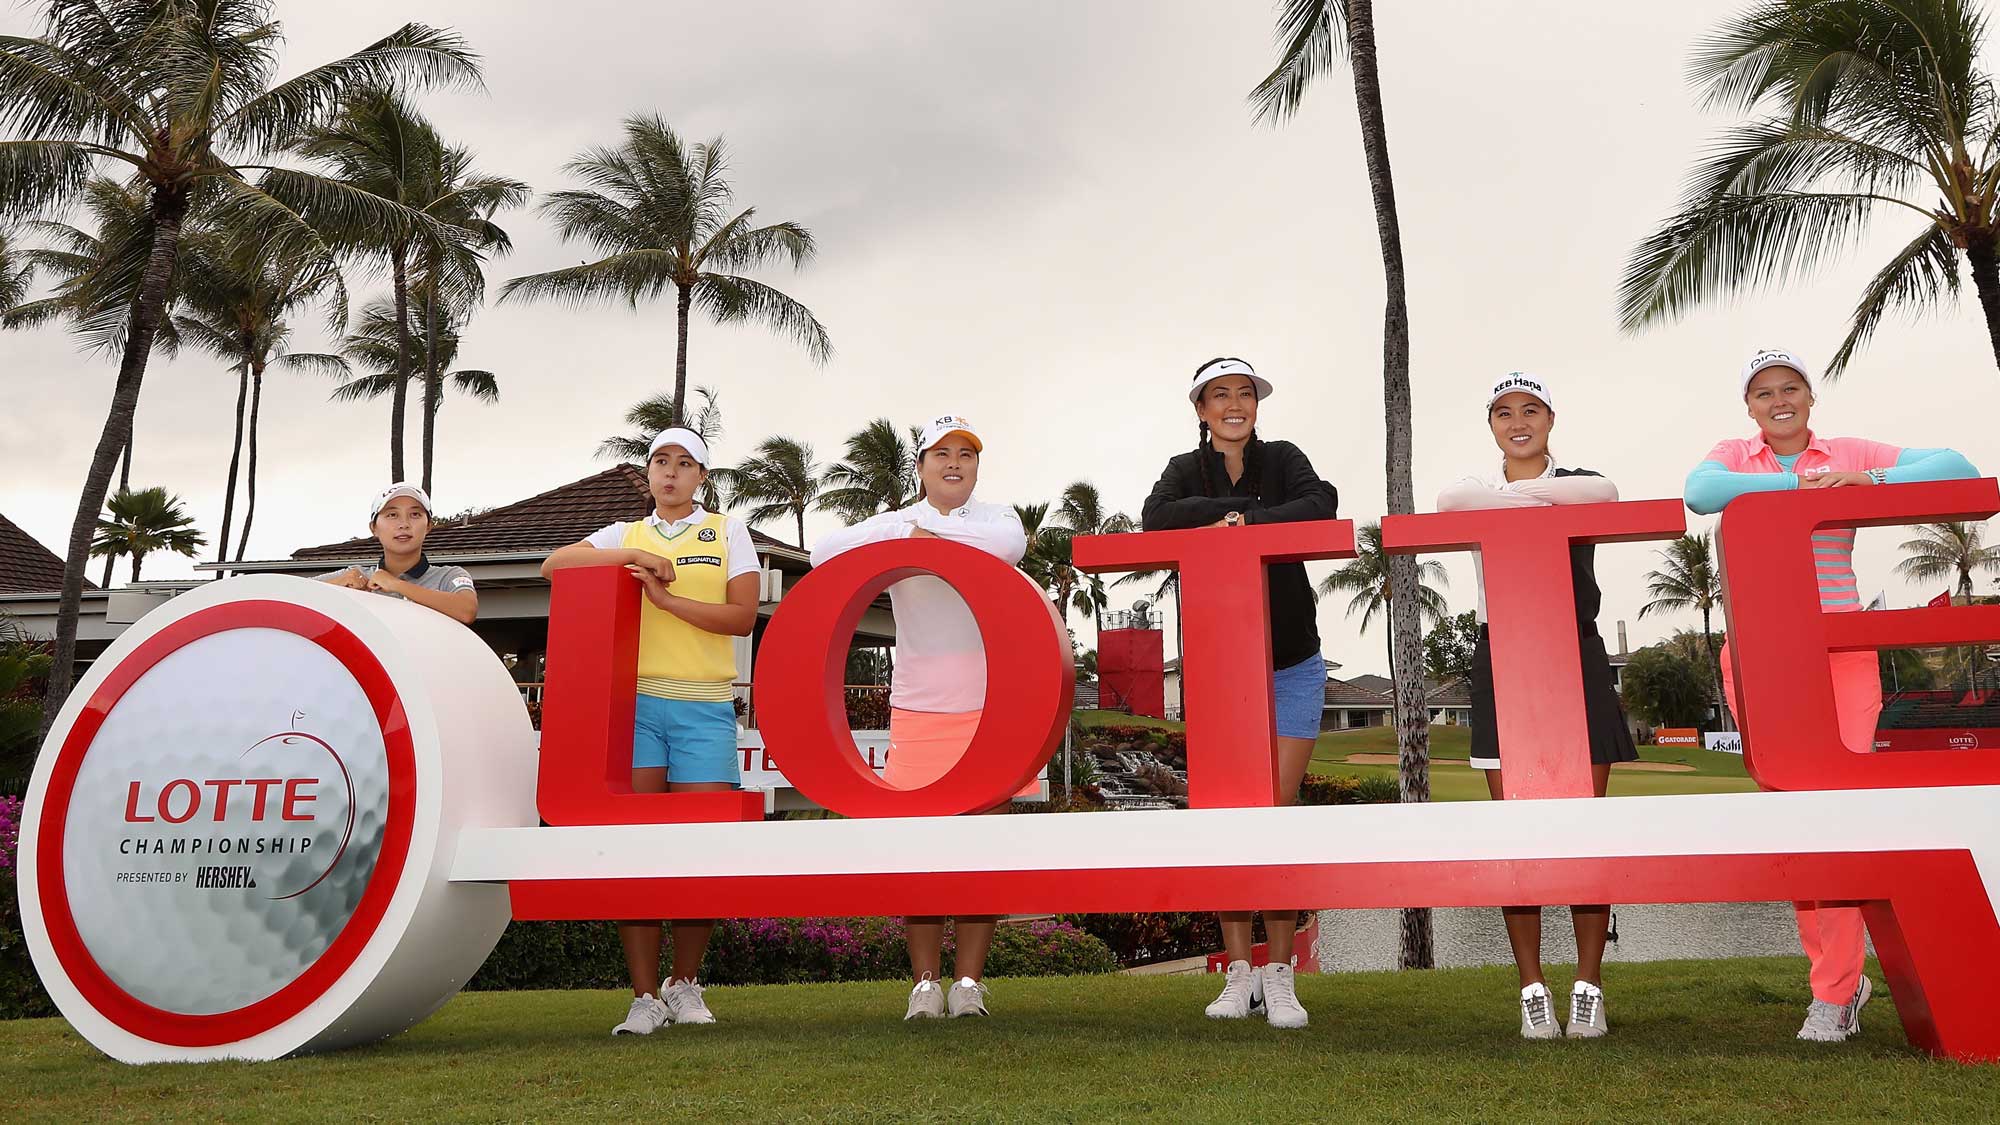 (L-R) Hyo Joo Kim, In Gee Chun, Inbee Park, Michelle Wie, Minjee Lee and Brooke M. Henderson pose together at a photo call ahead of the LPGA LOTTE Championship Presented By Hershey at Ko Olina Golf Club